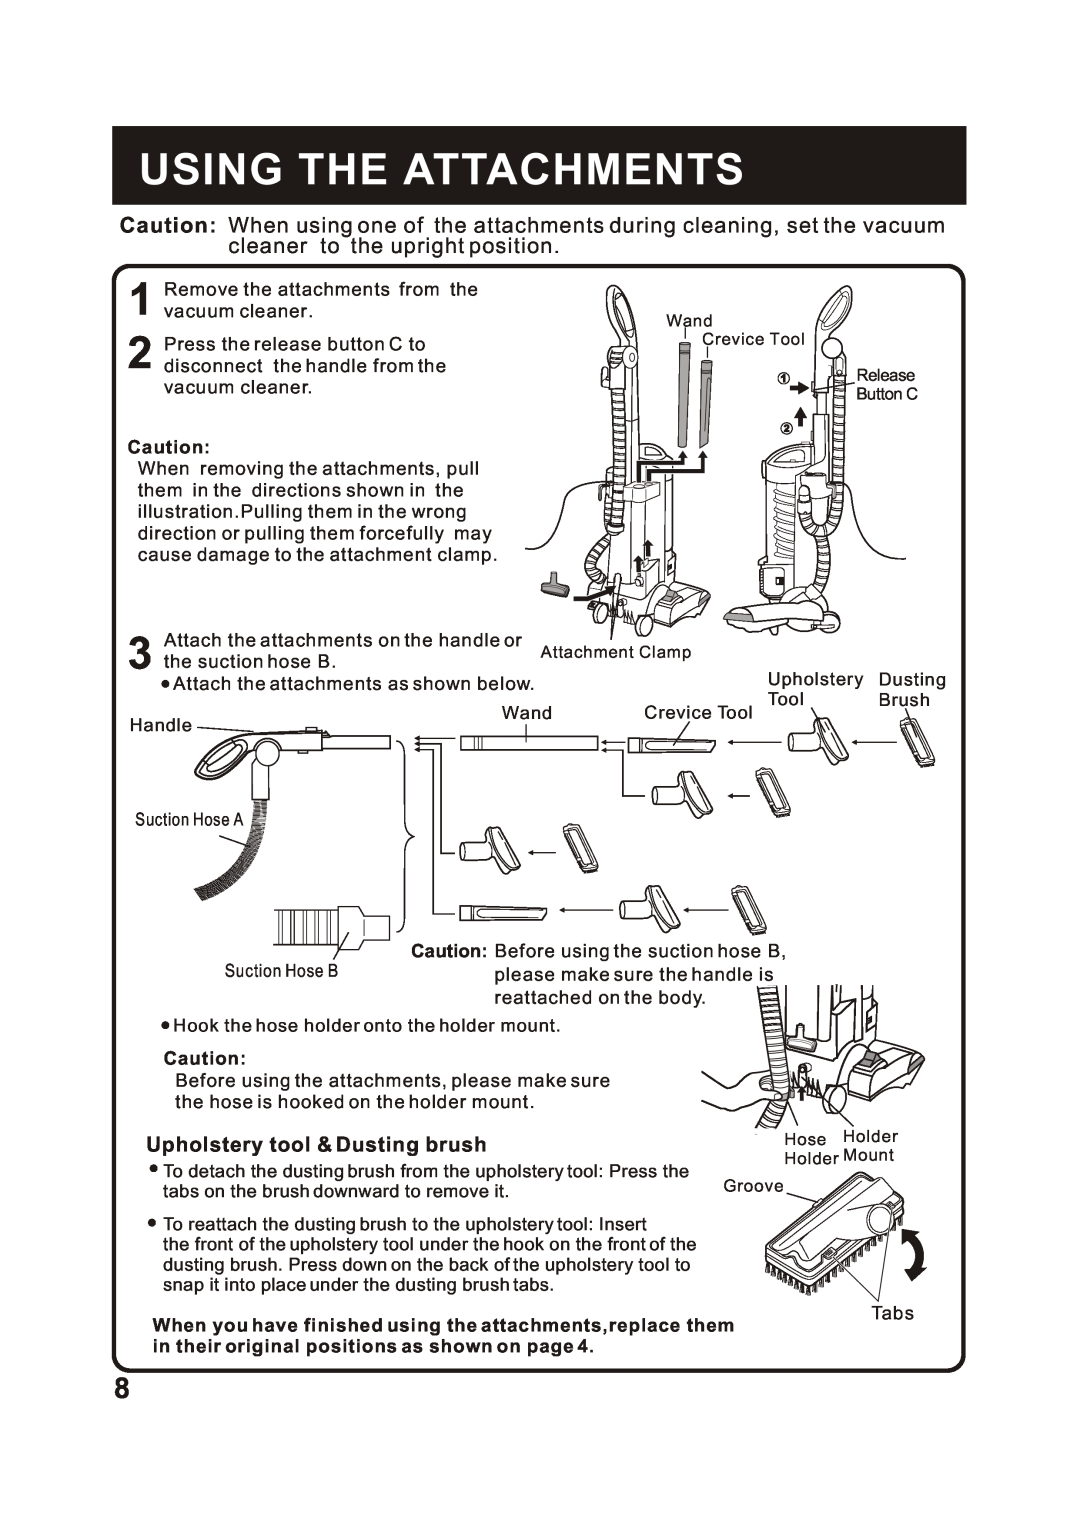 Fantom Vacuum FM741HV instruction manual Using The Attachments, Upholstery tool & Dusting brush 